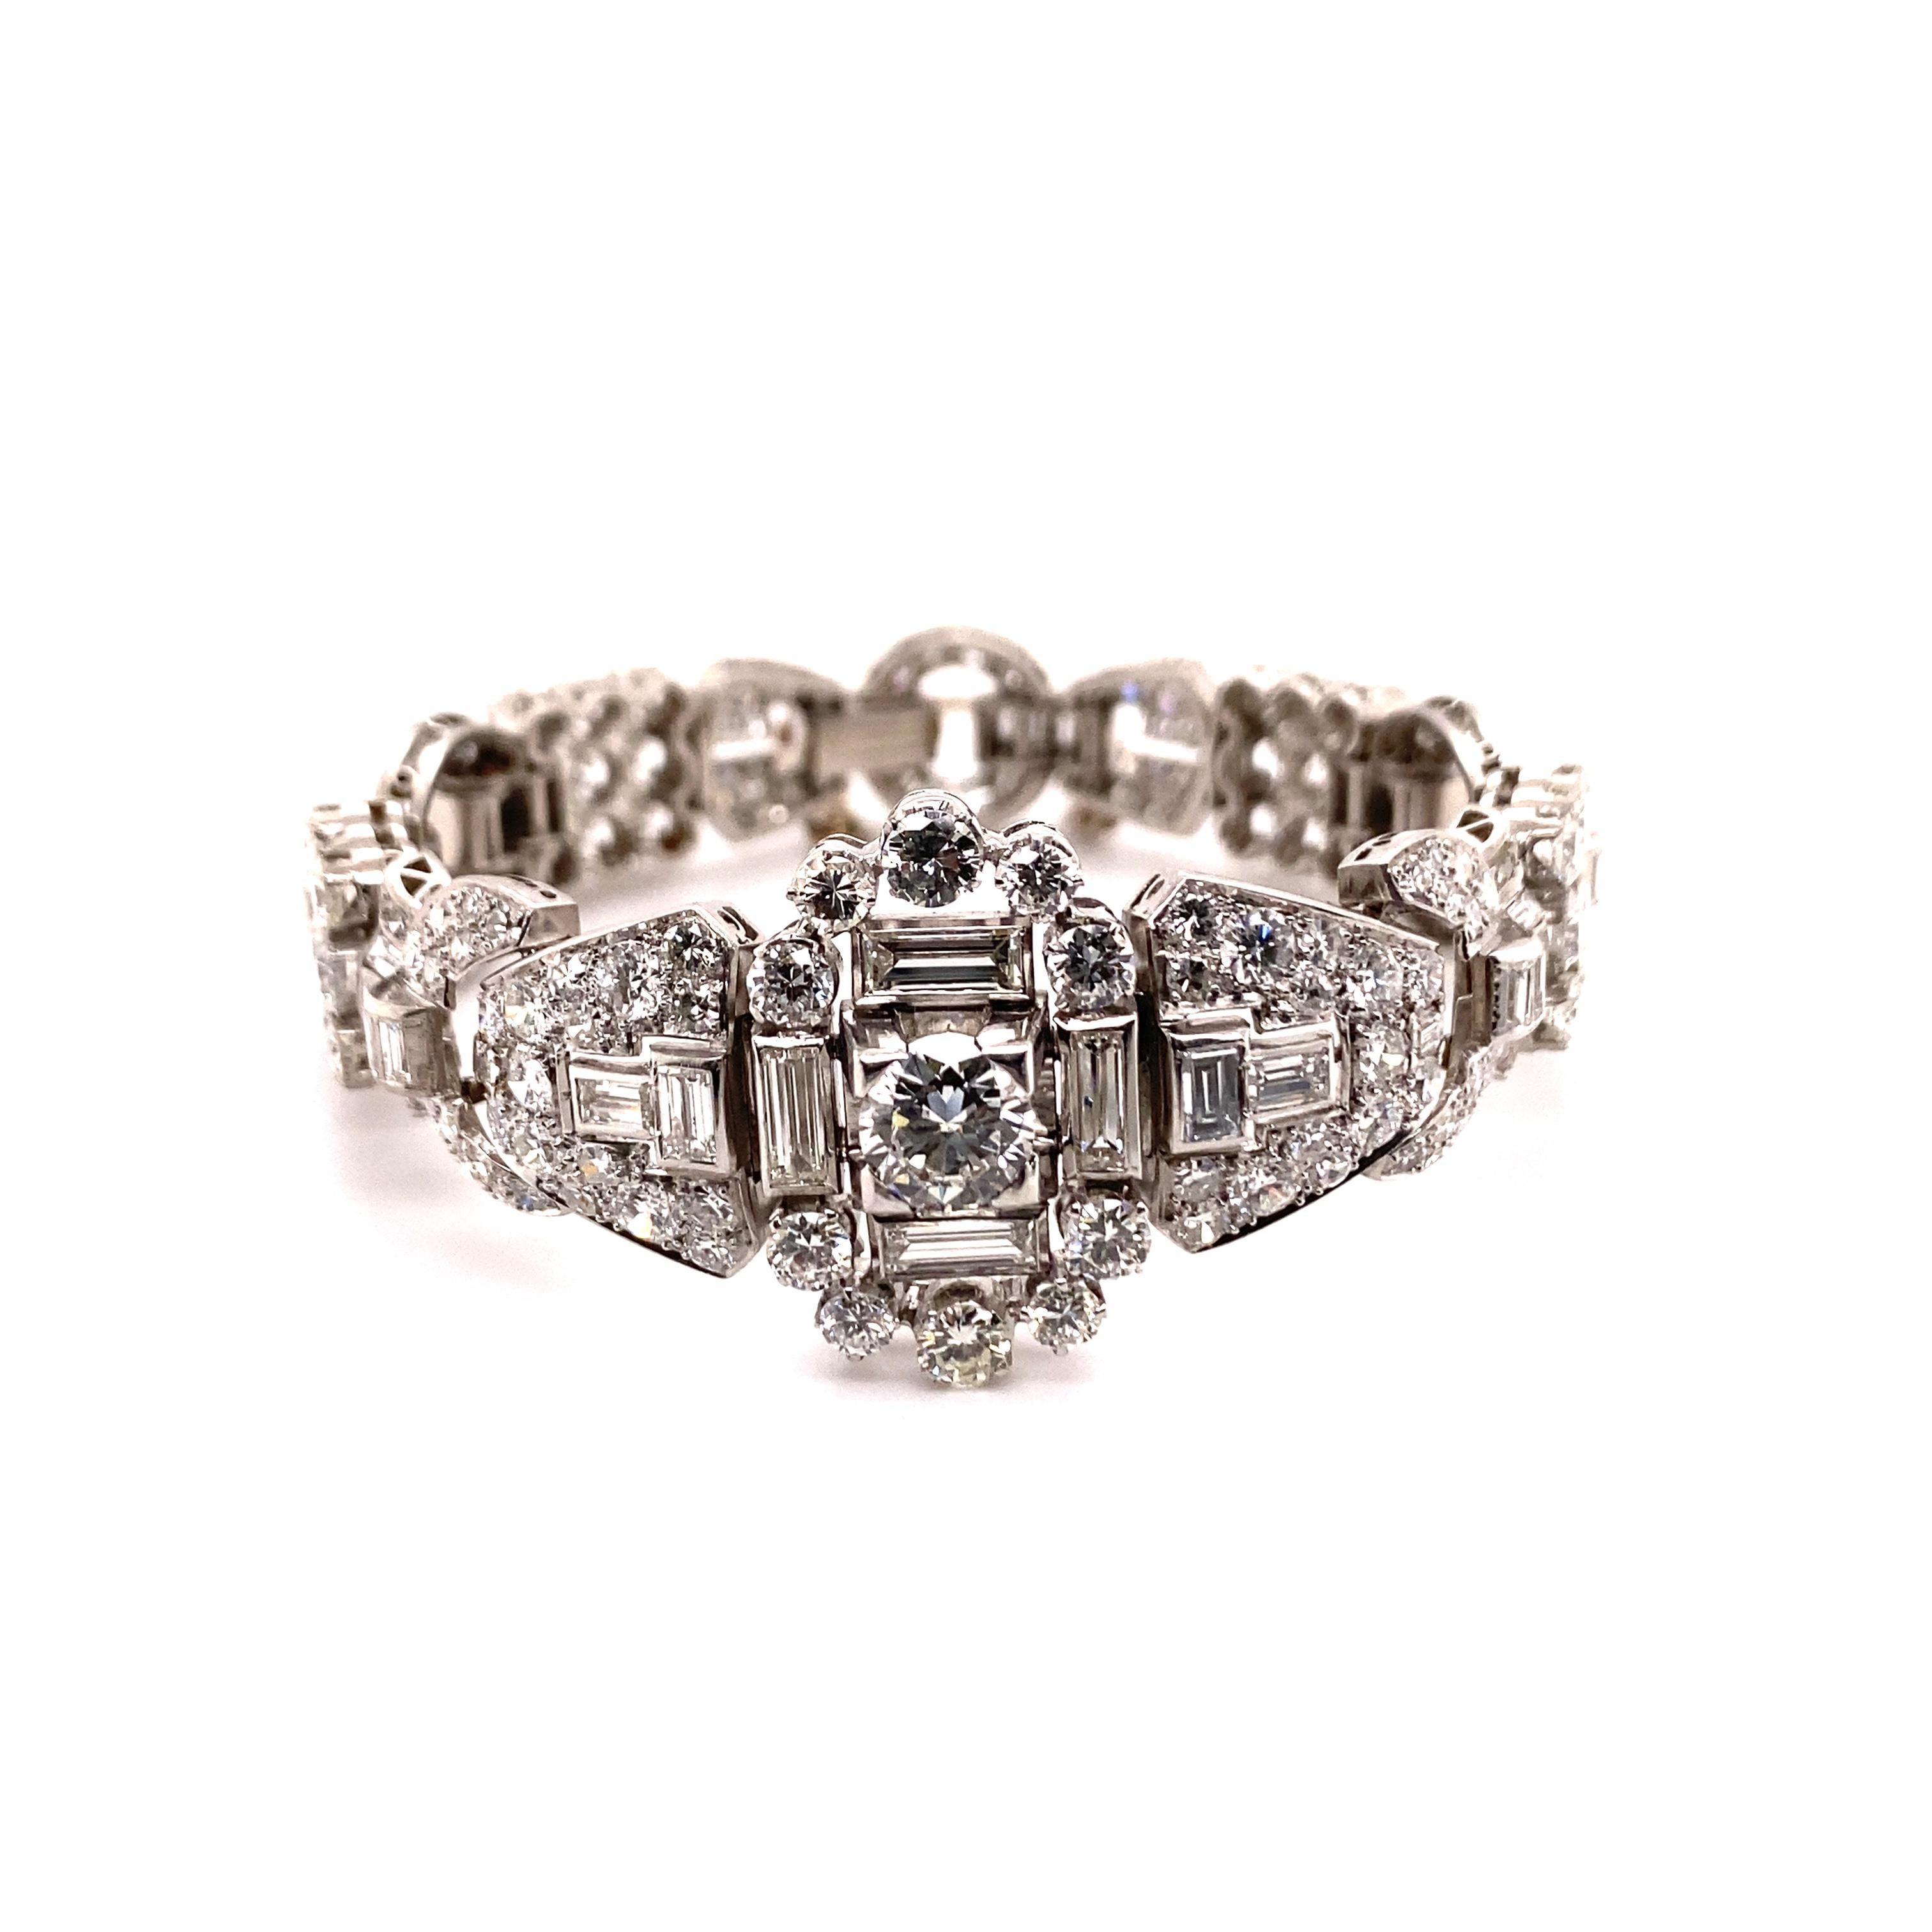 This beautifully sparkling and geometric diamond bracelet evokes the glittering Art Deco era. Masterfully constructed and crafted in platinum 950, the bracelet centre is set with a brilliant-cut diamond of approximately 1.28 carats and of G-si1